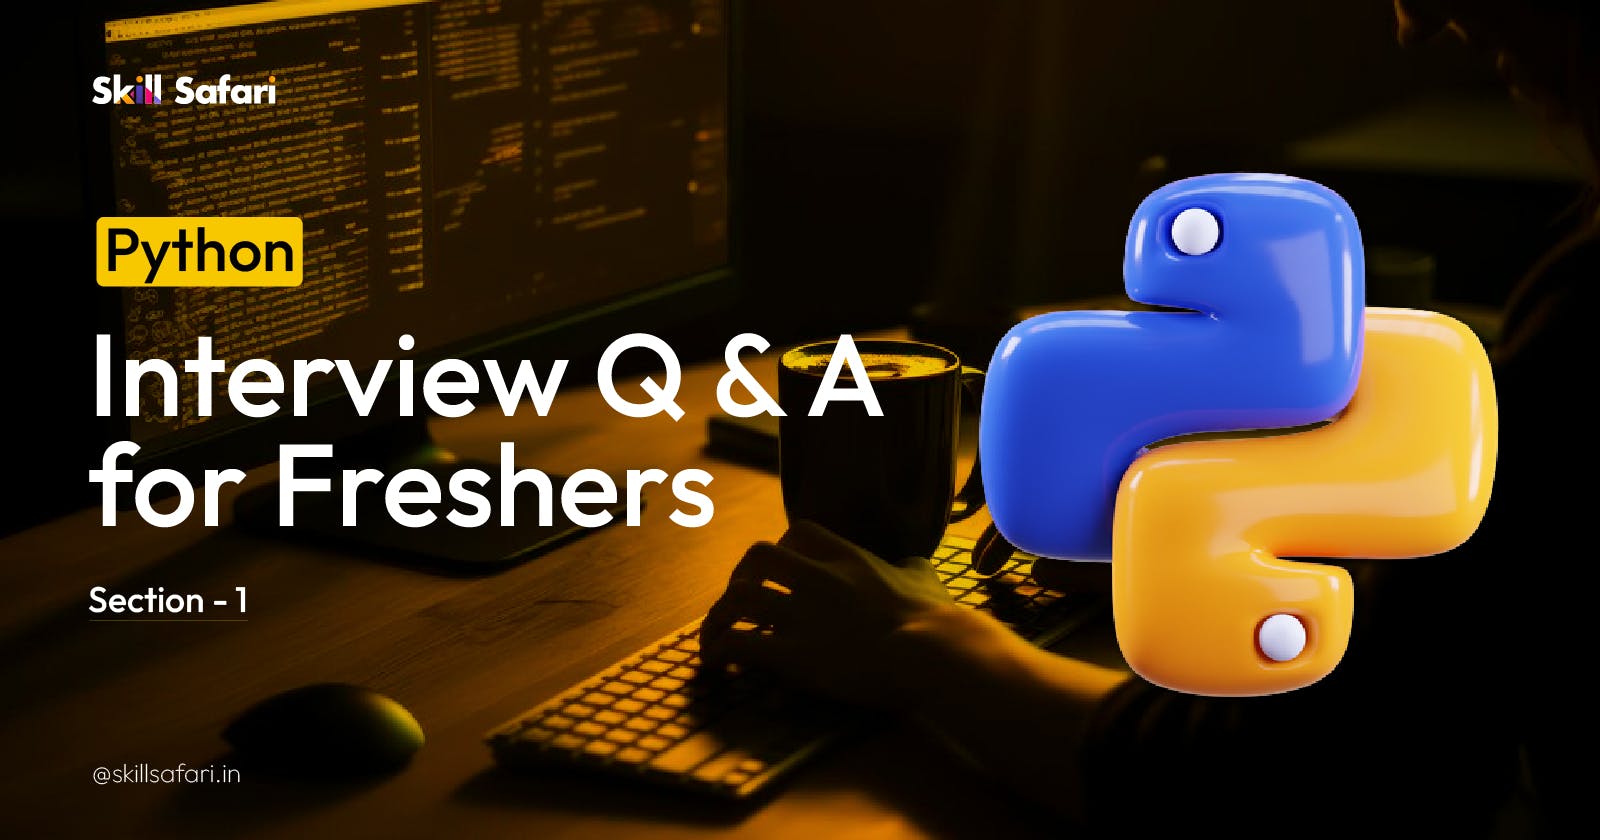 Python Interview Questions And Answers for Freshers? Section - 1